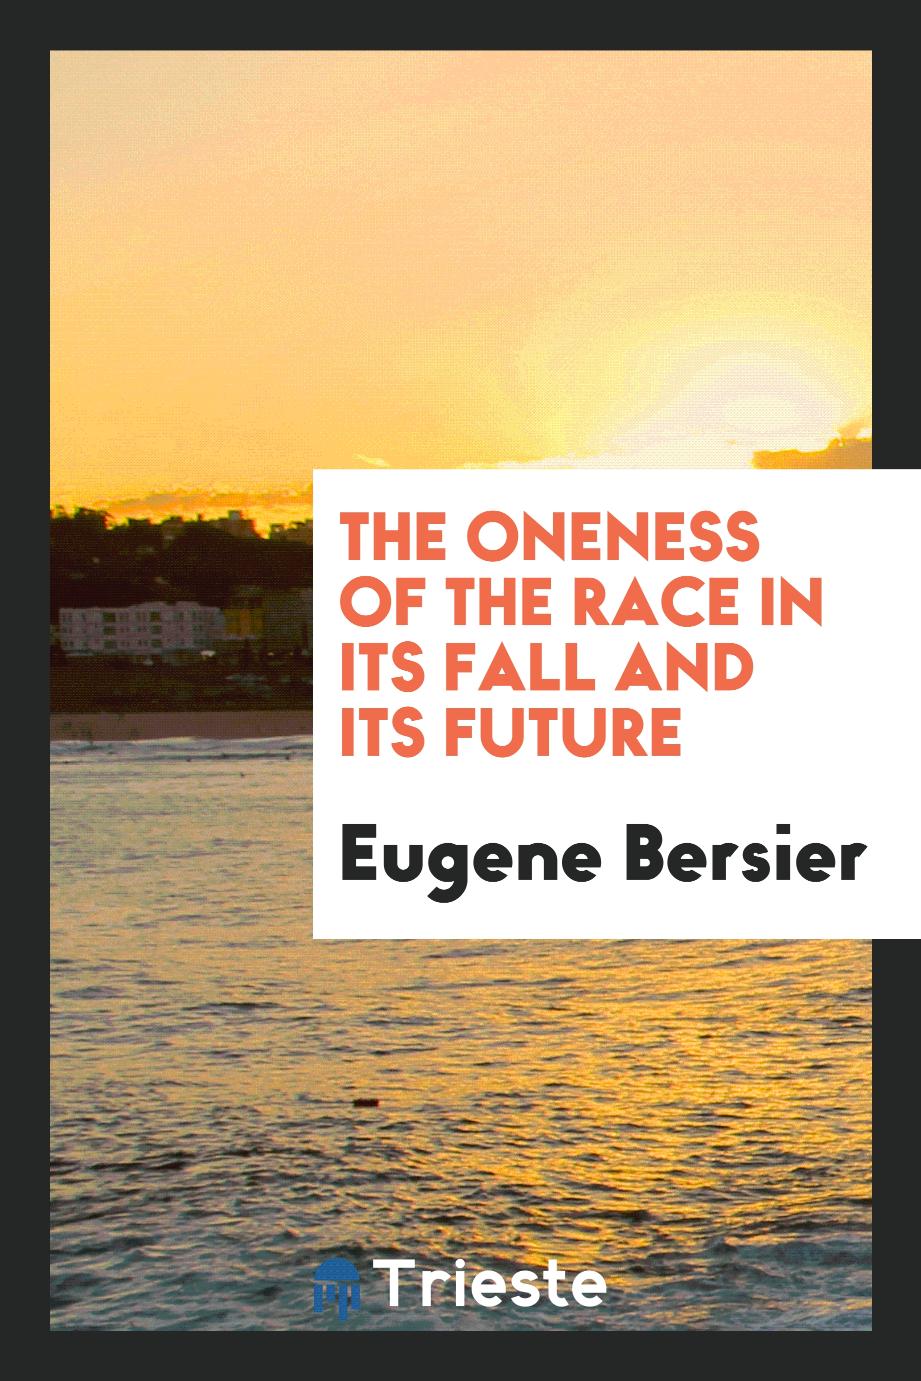 The Oneness of the Race in Its Fall and Its Future